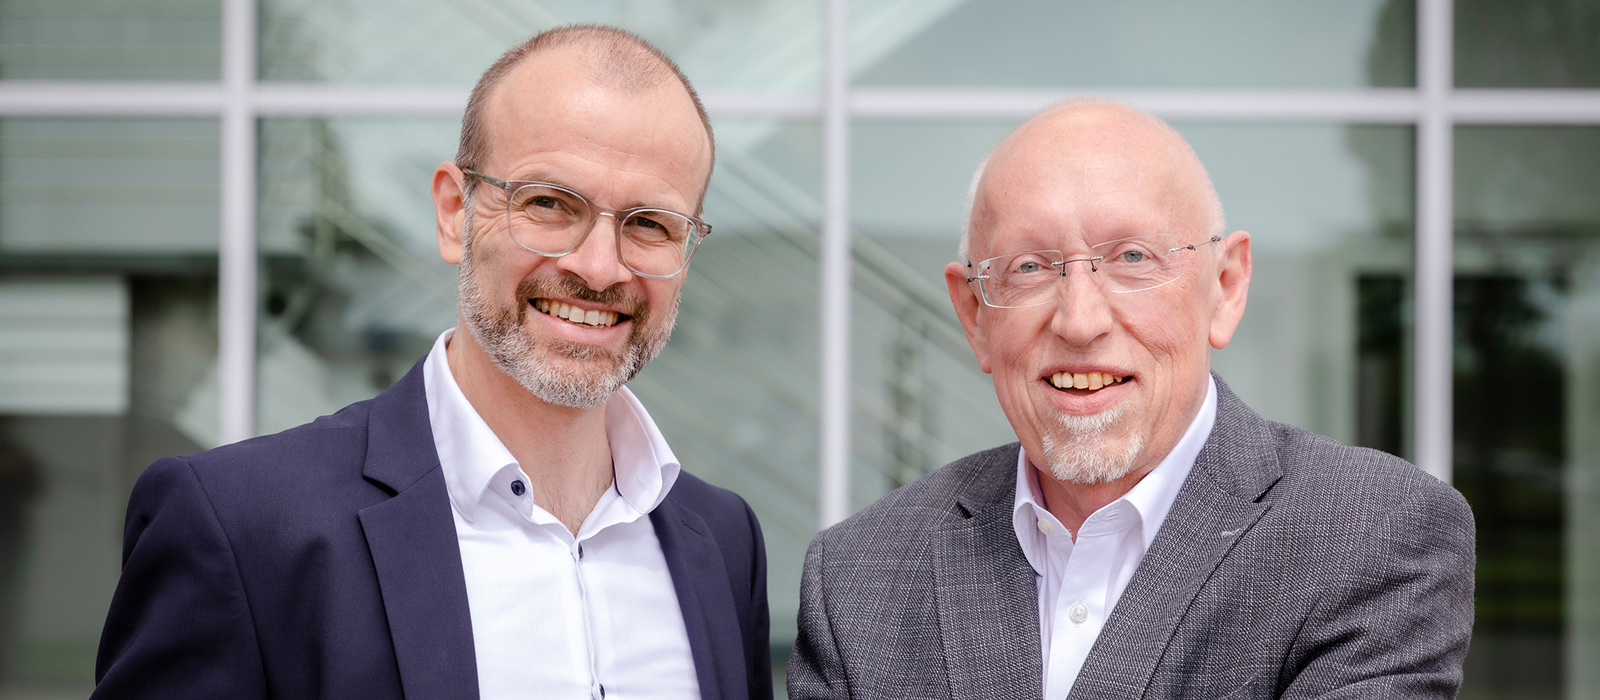 The departing Managing Director of RK Rose+Krieger GmbH, Hartmut Hoffmann (left), and his successor, Dr.-Ing. Gregor Langer (right), who takes over on 1 July 2021